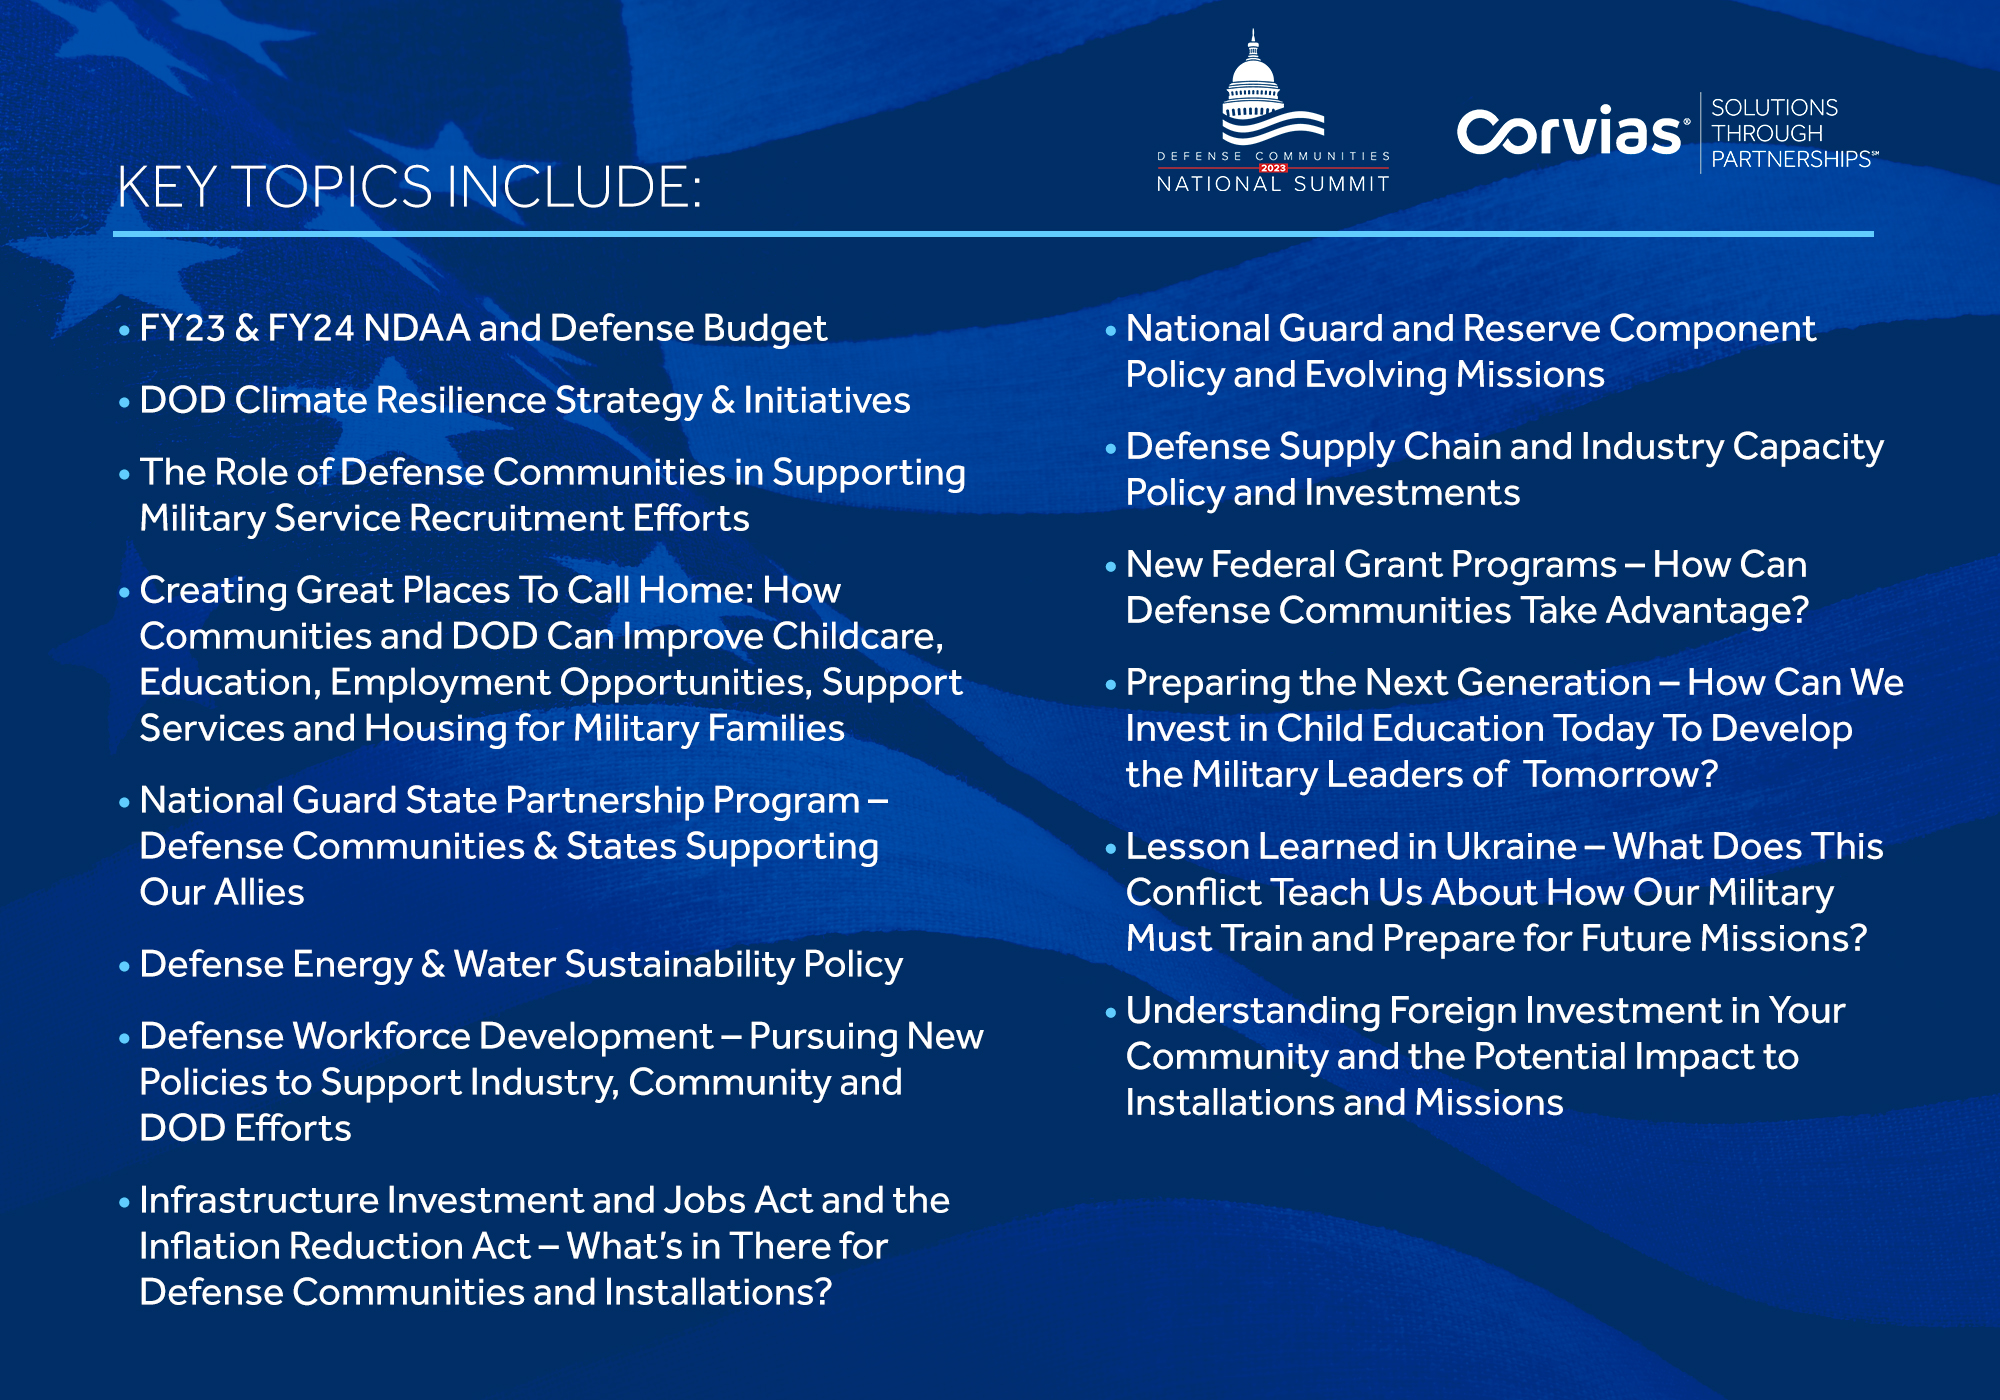 Corvias sponsors "We Are One" Community Reception at the Association of Defense Communities National Summit